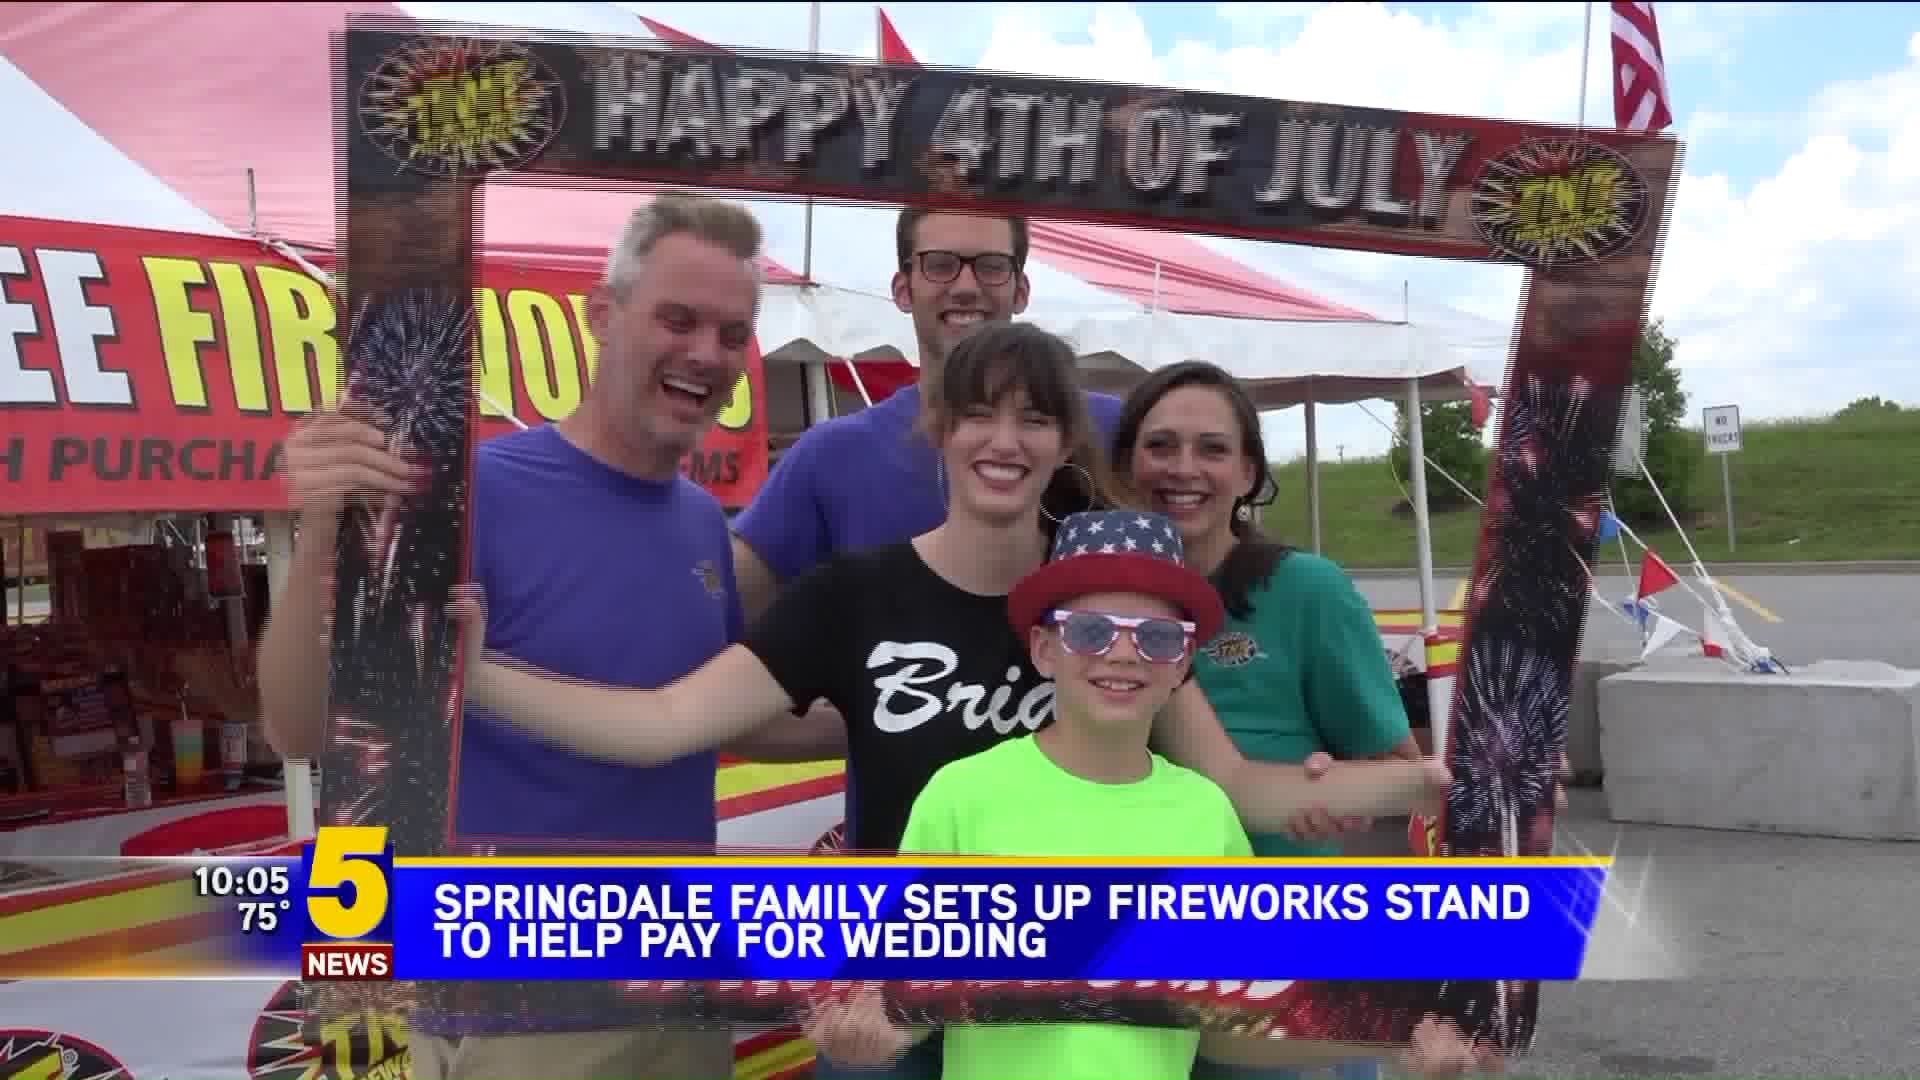 Springdale Family Sets Up Fireworks Stand To Help Pay For Wedding